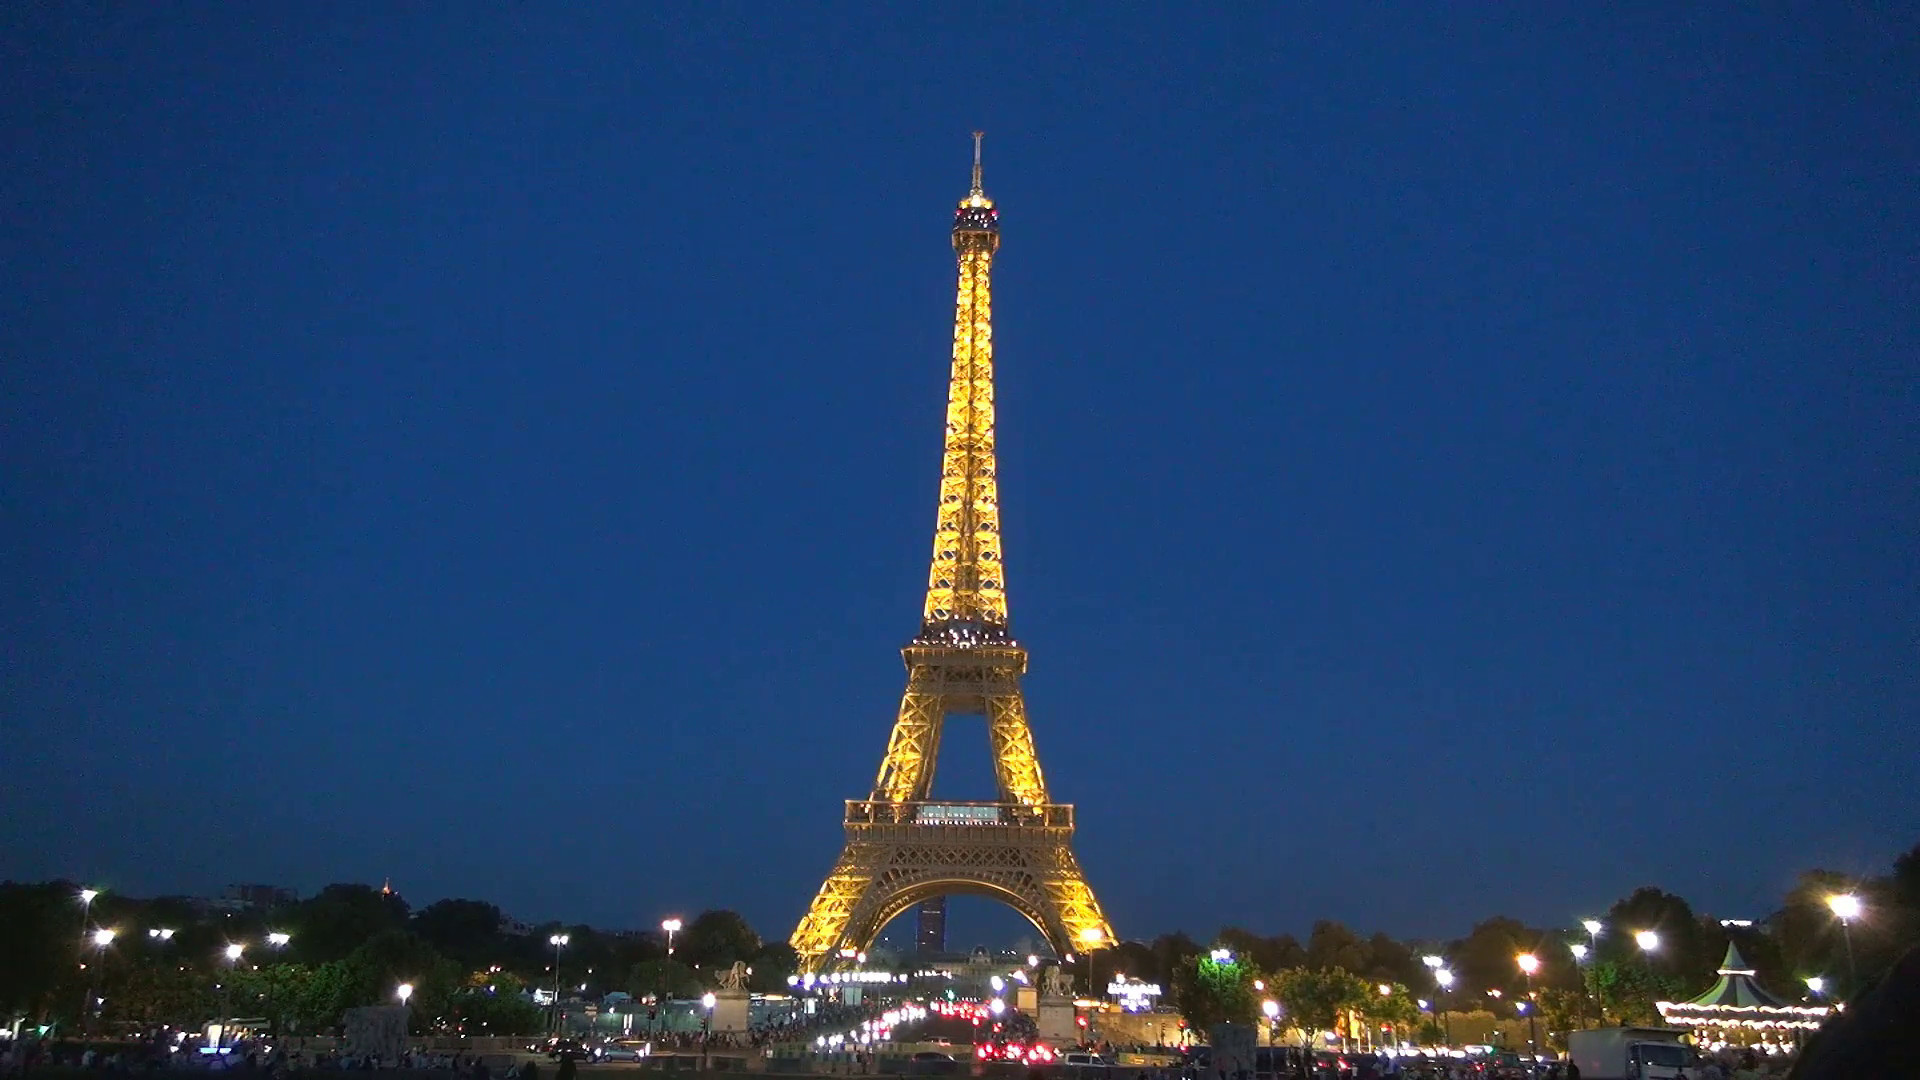 1920x1080 Eiffel tower at Night Paris France Wallpaper Wallpapers Wide top